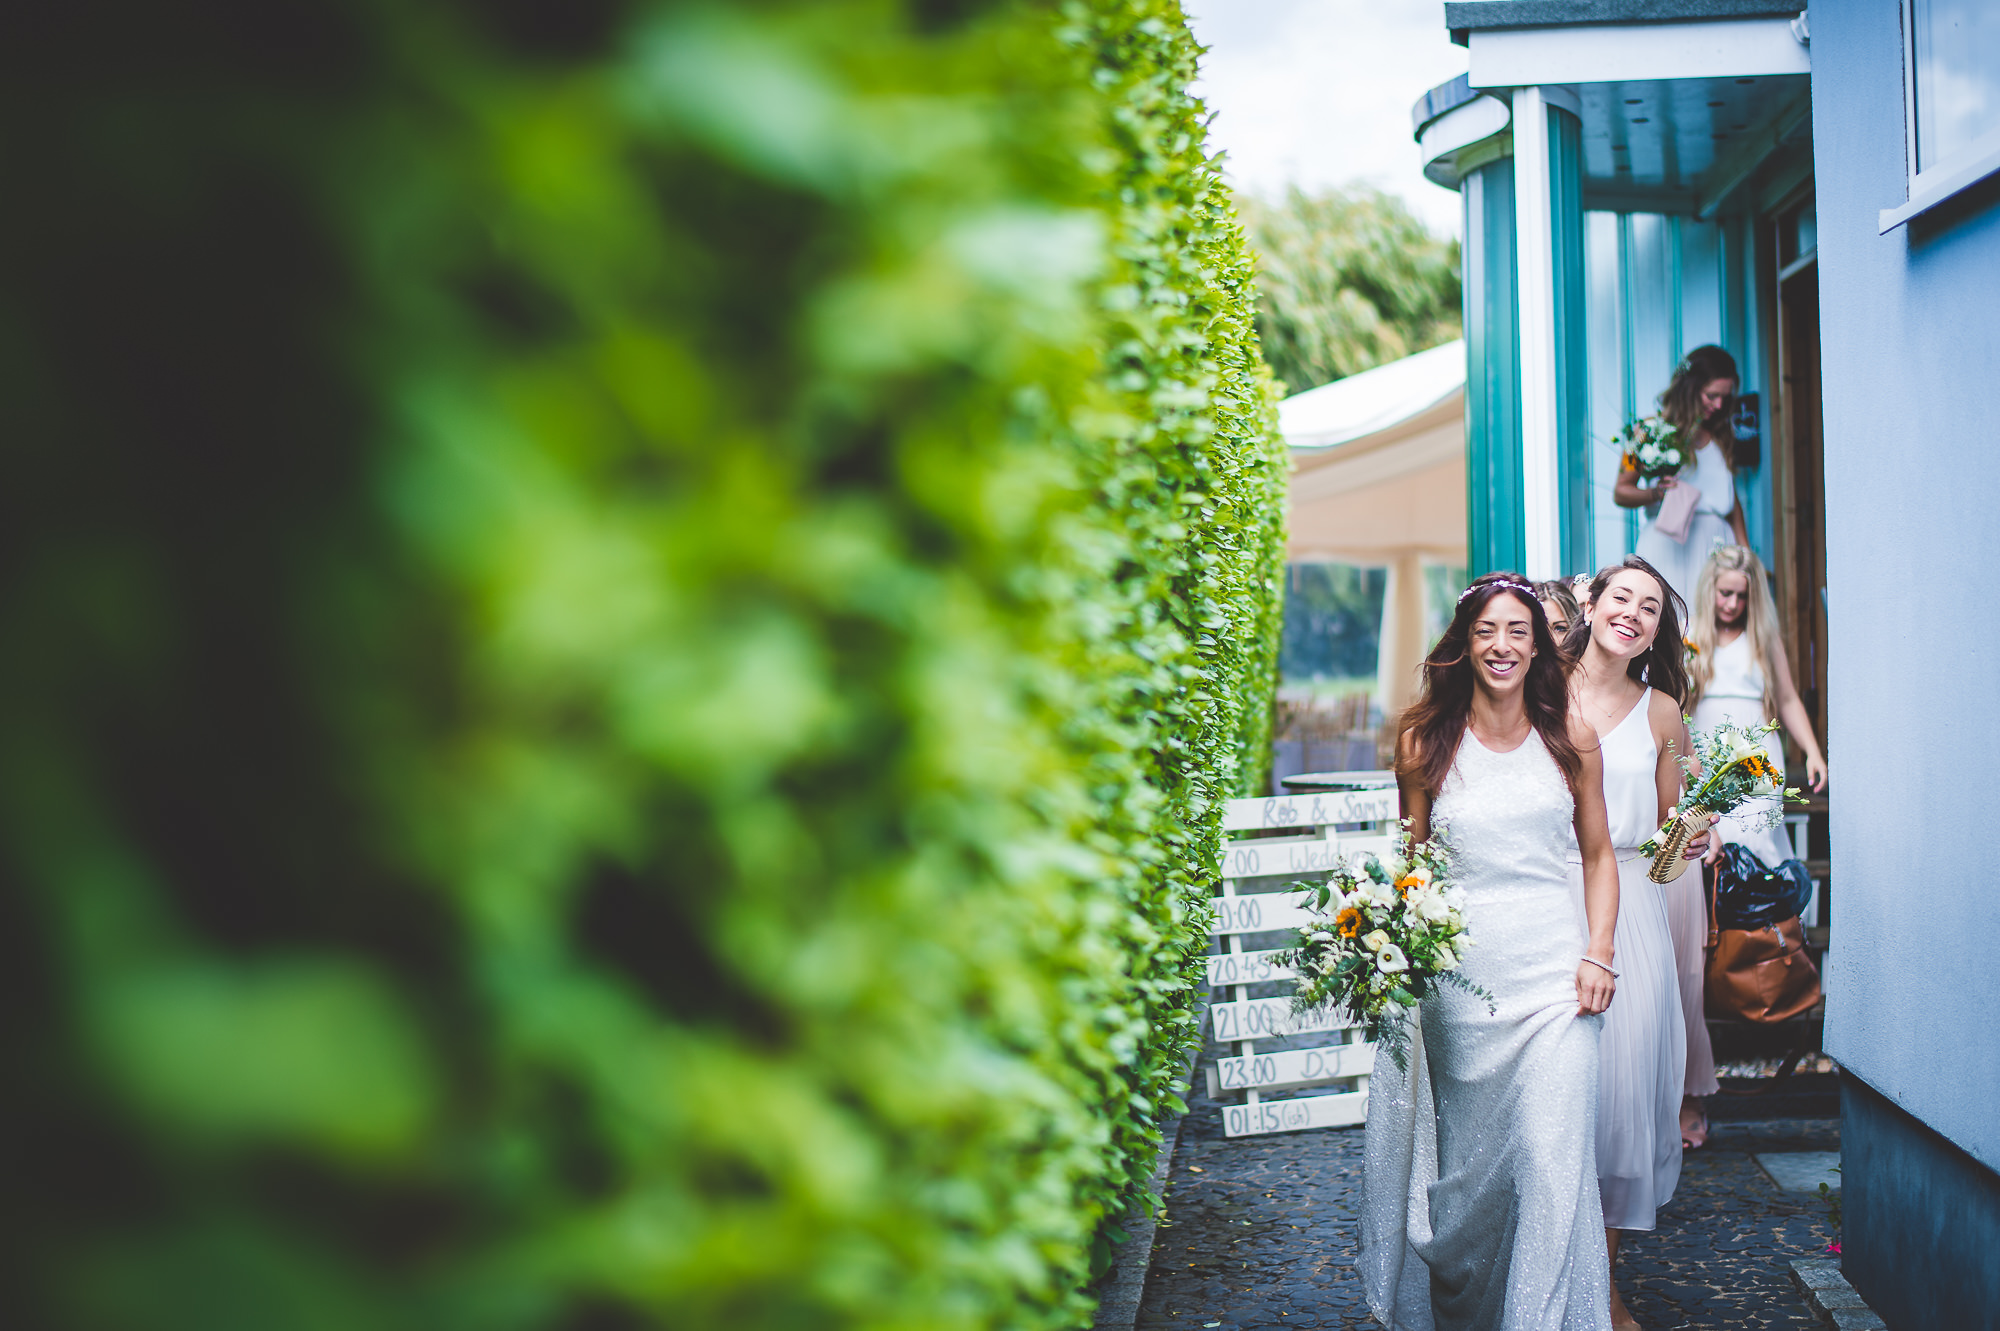 A bride and her bridesmaids walk through a doorway in this wedding photo.